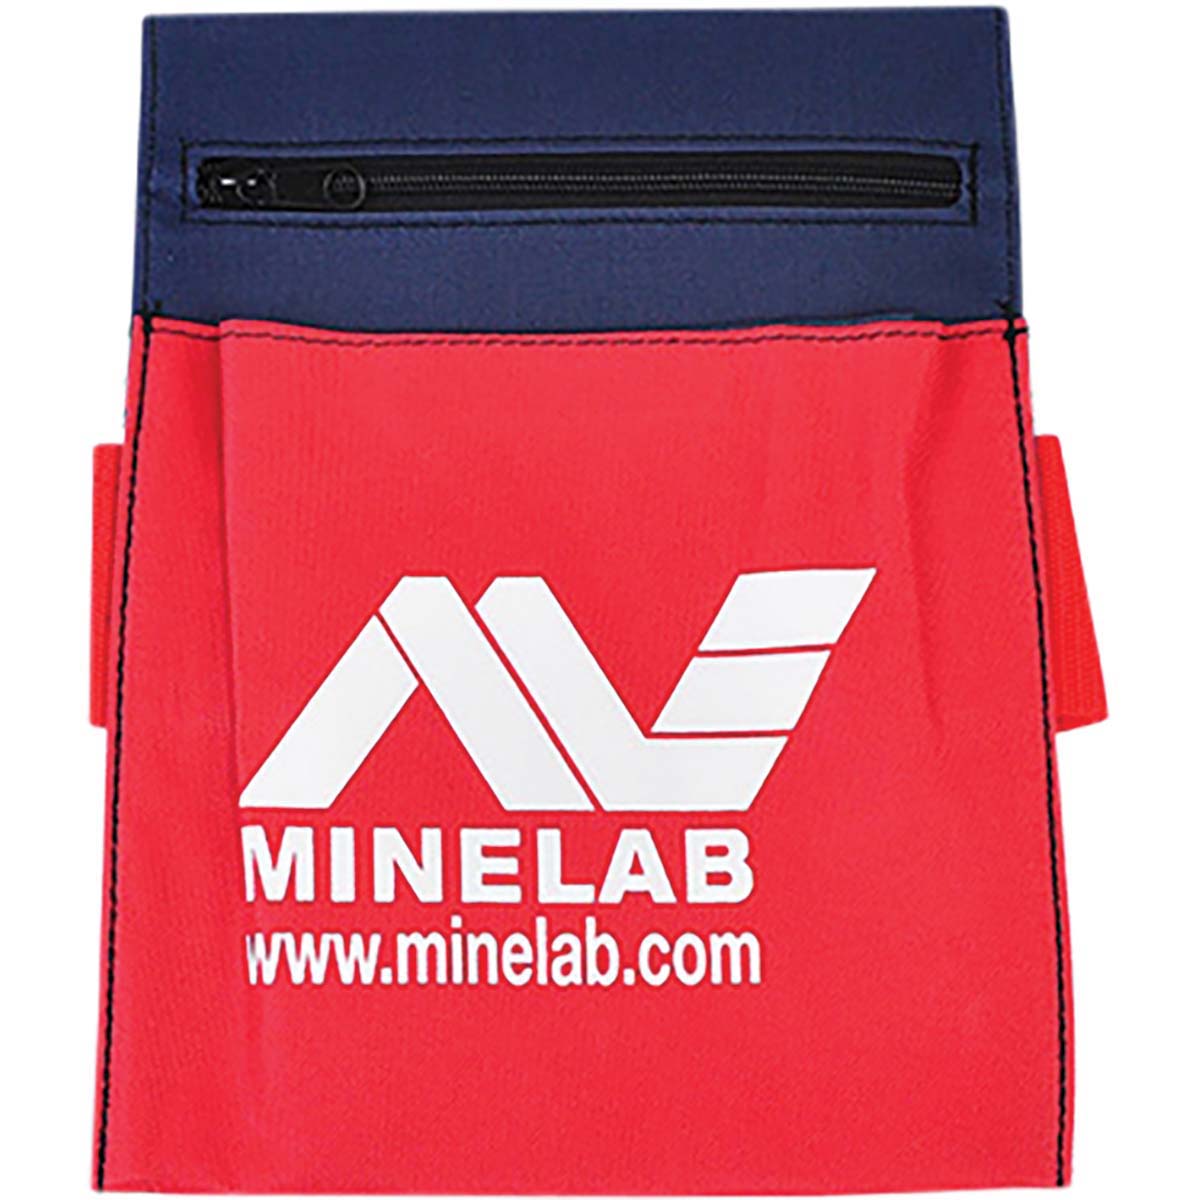 Minelab Tool and Finds Bag